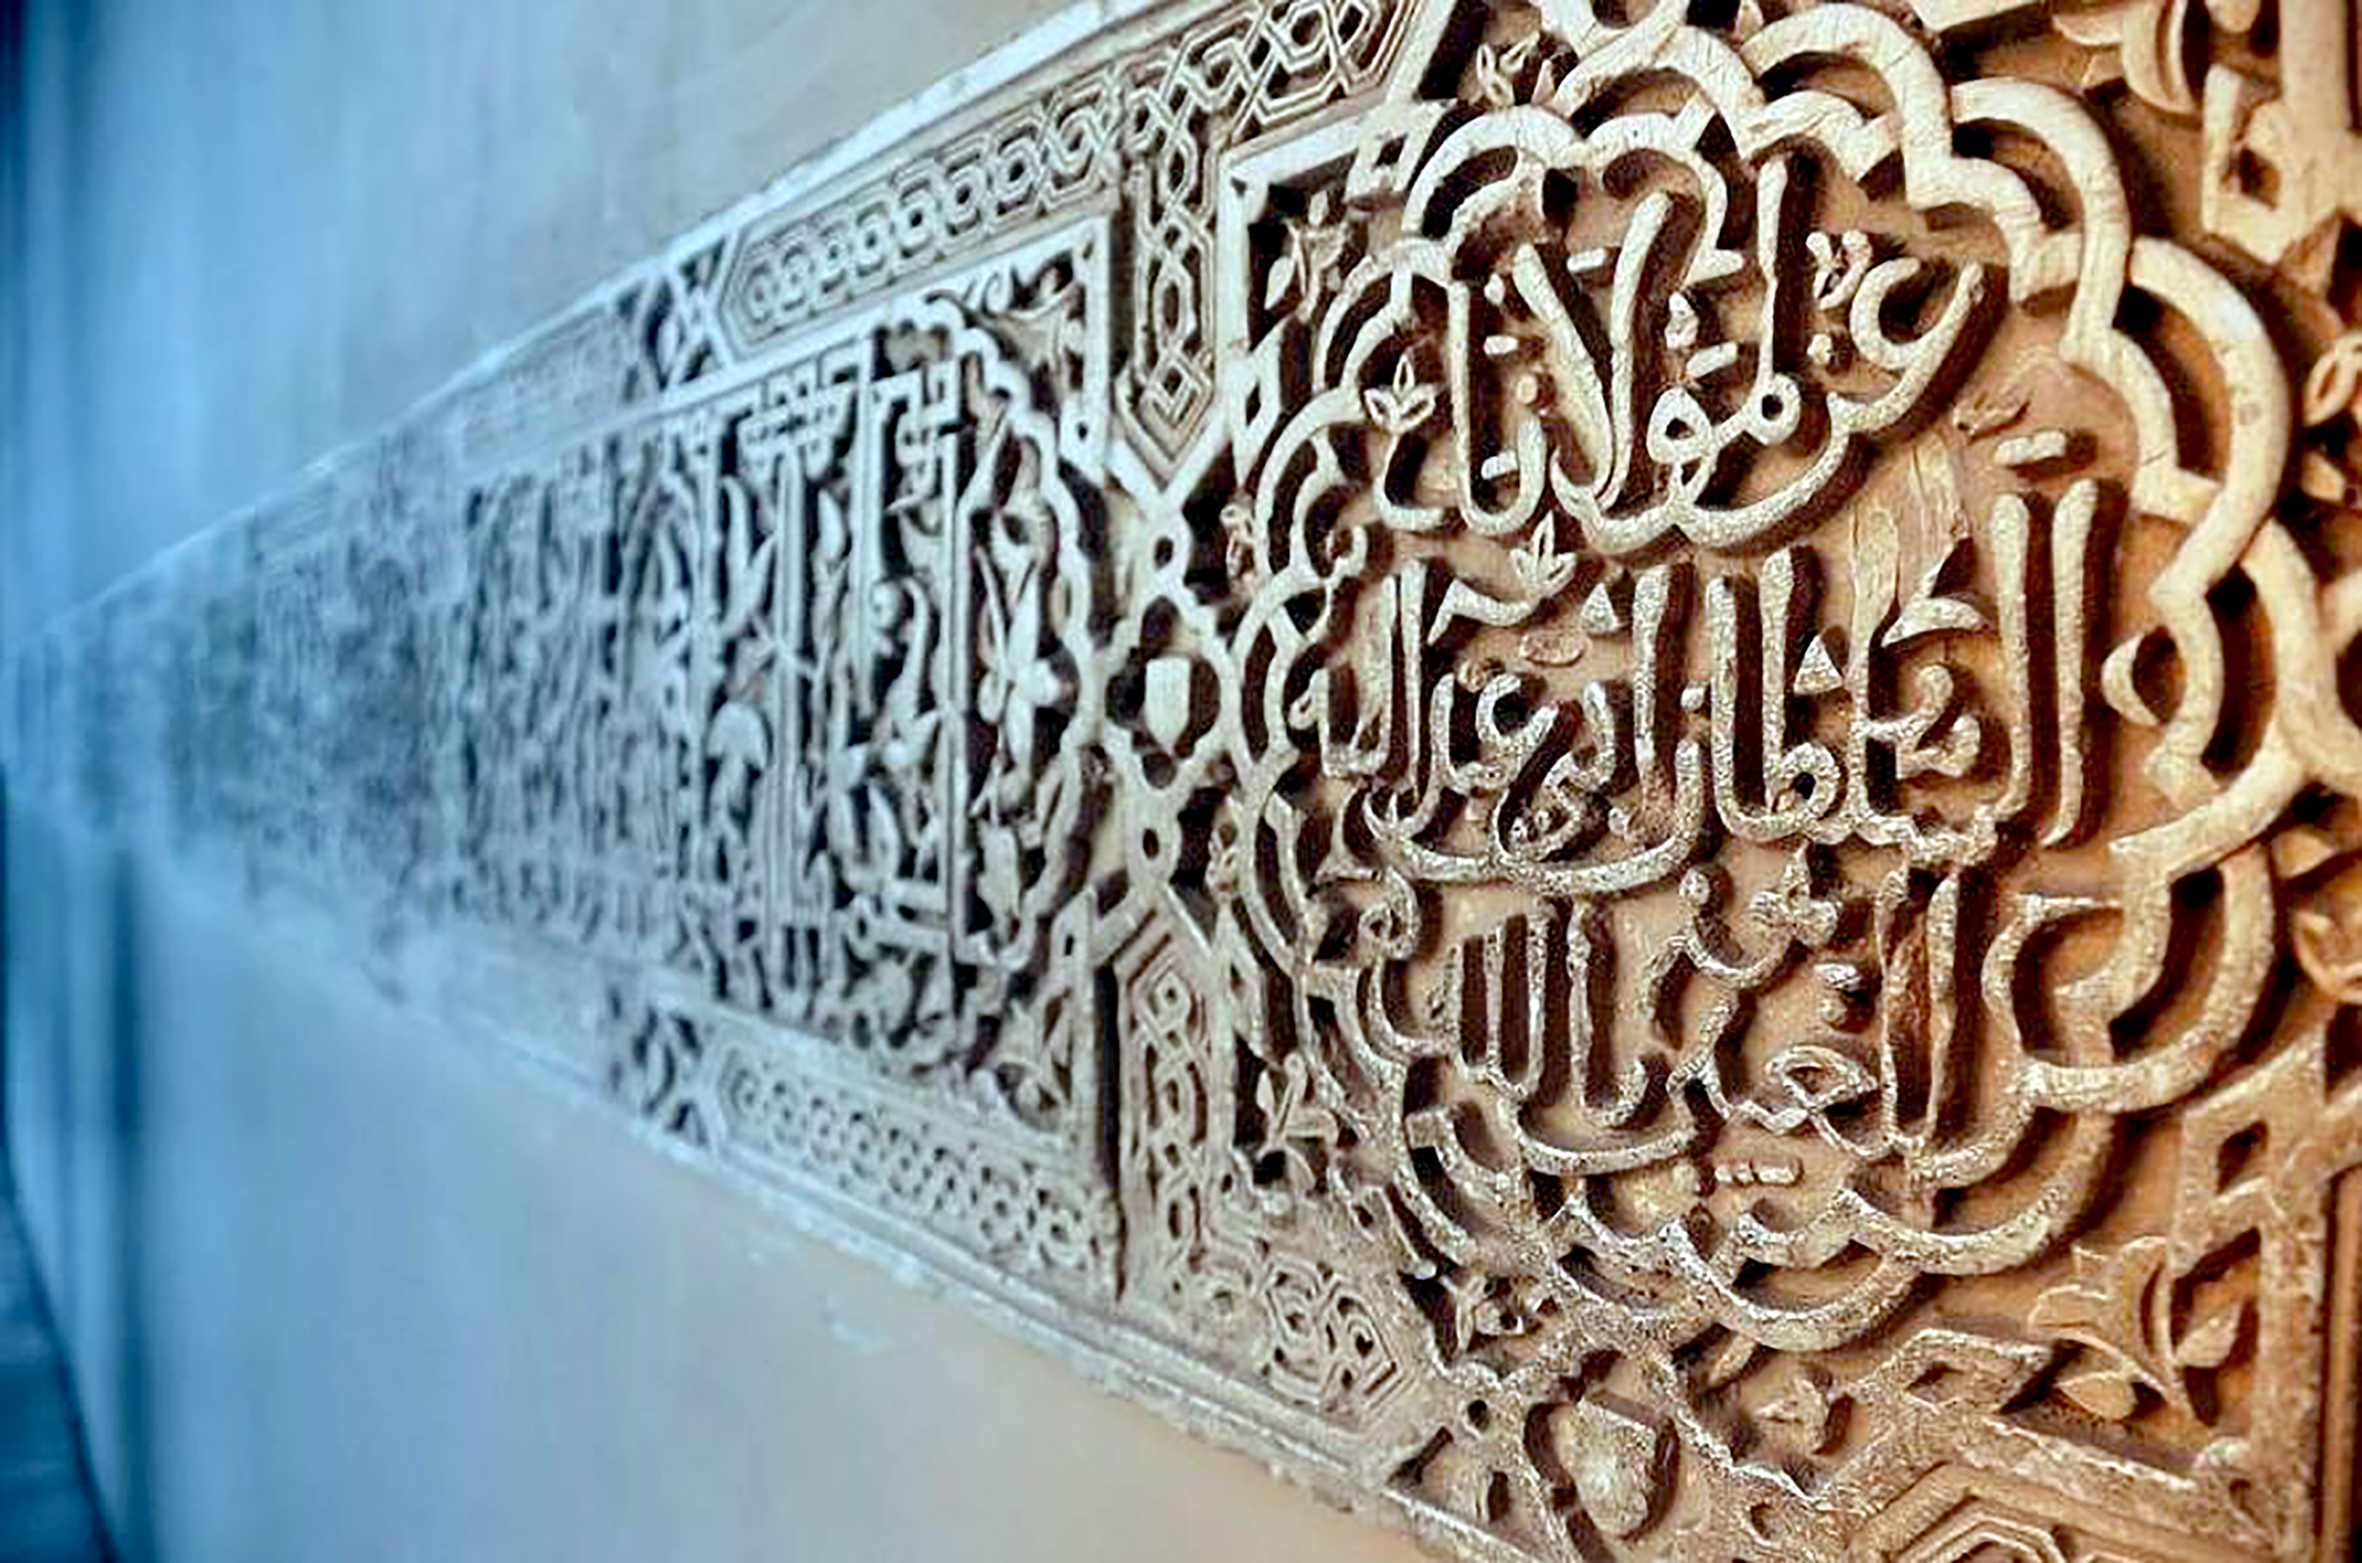 Tolerance in Islam: the case of Al-Andalus